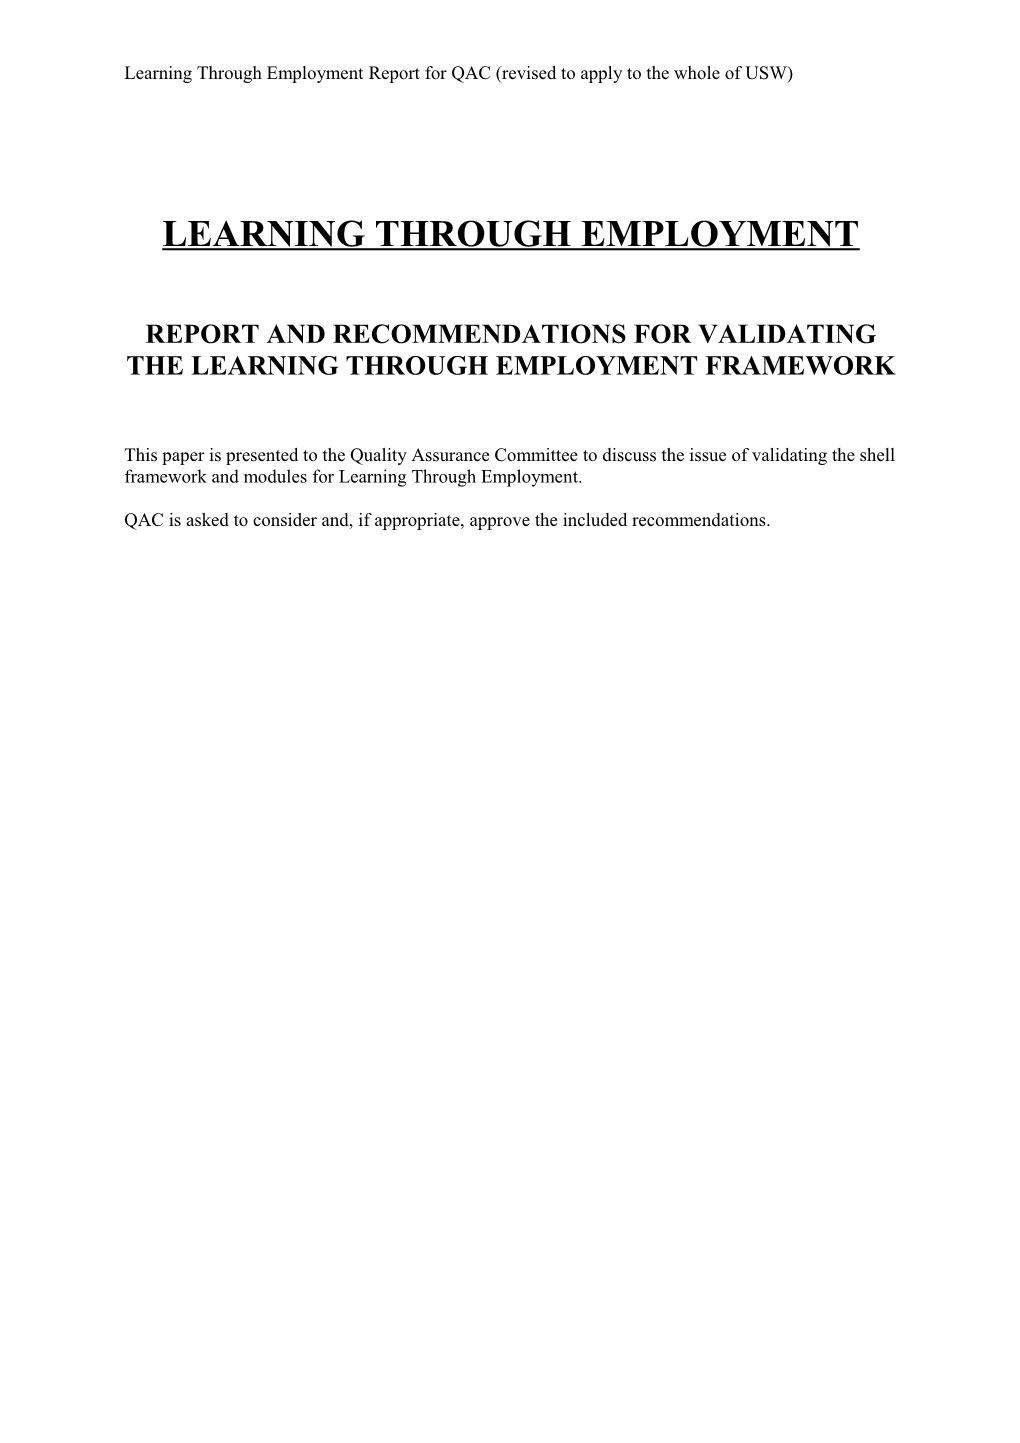 Learning Through Employment Report for QAC (Revised to Apply to the Whole of USW)